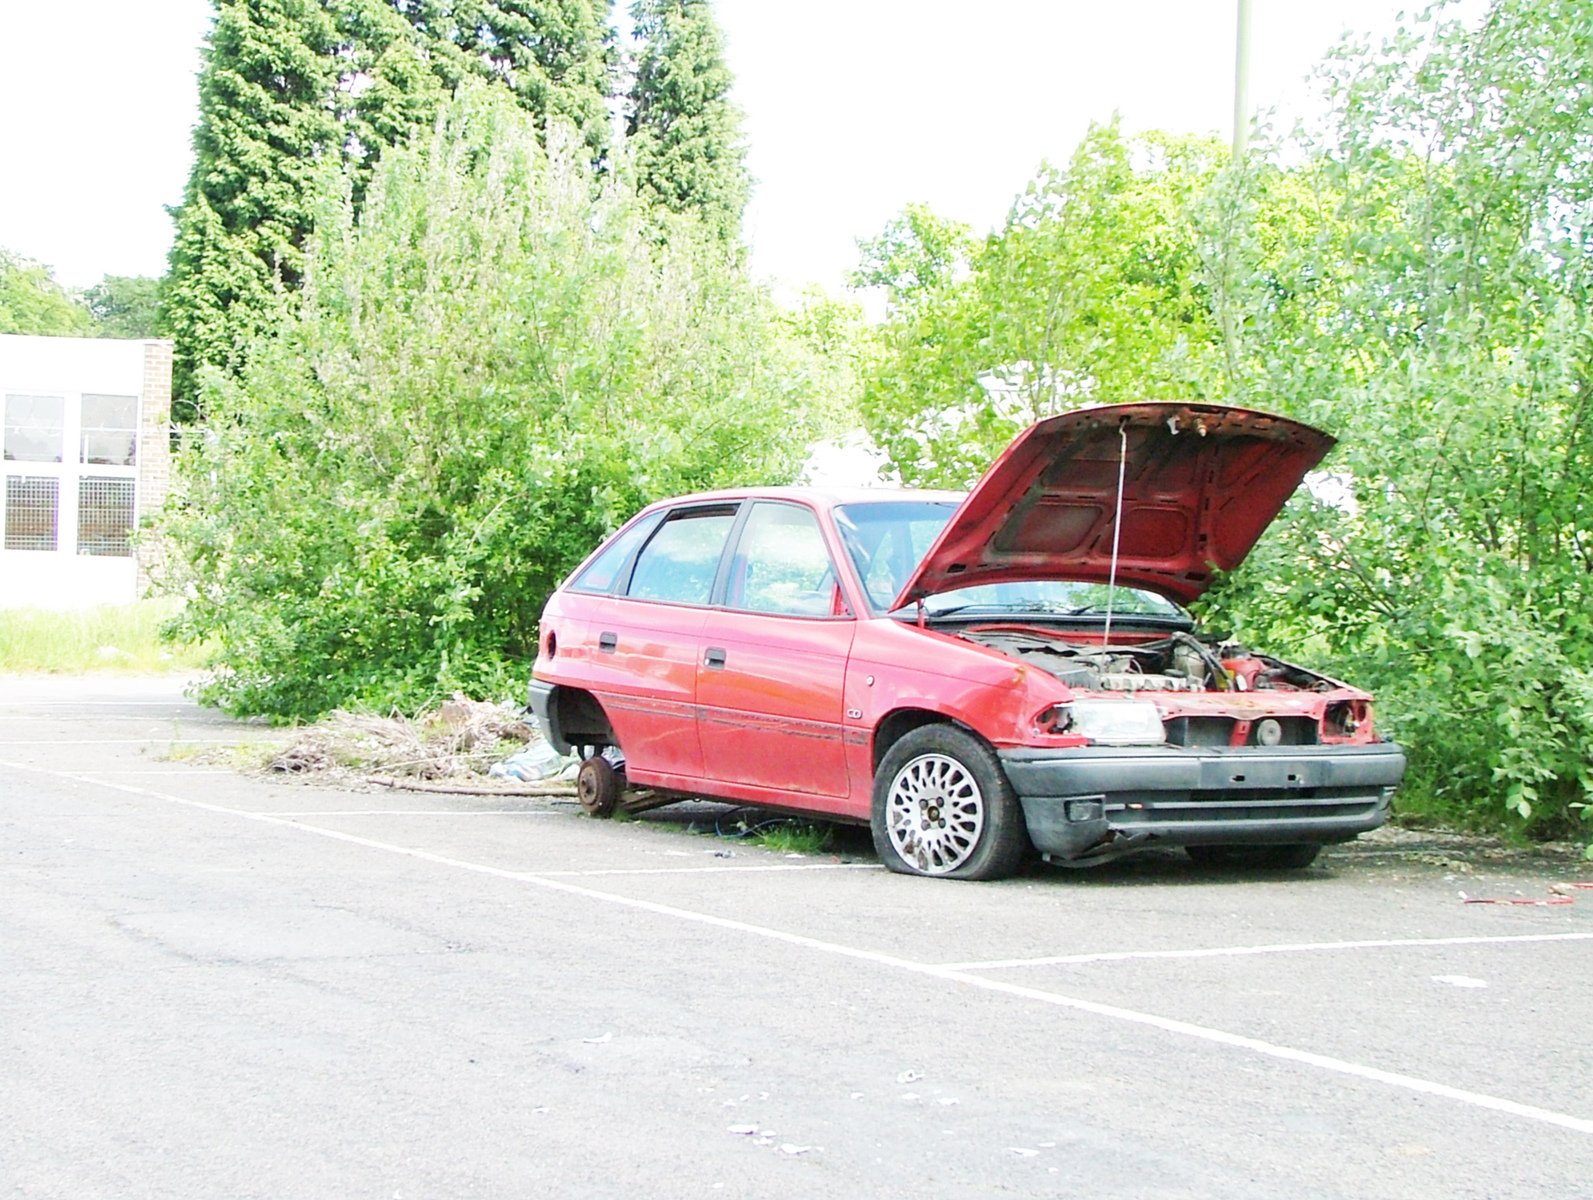 a red car in the middle of an overgrown area, it has its hood open